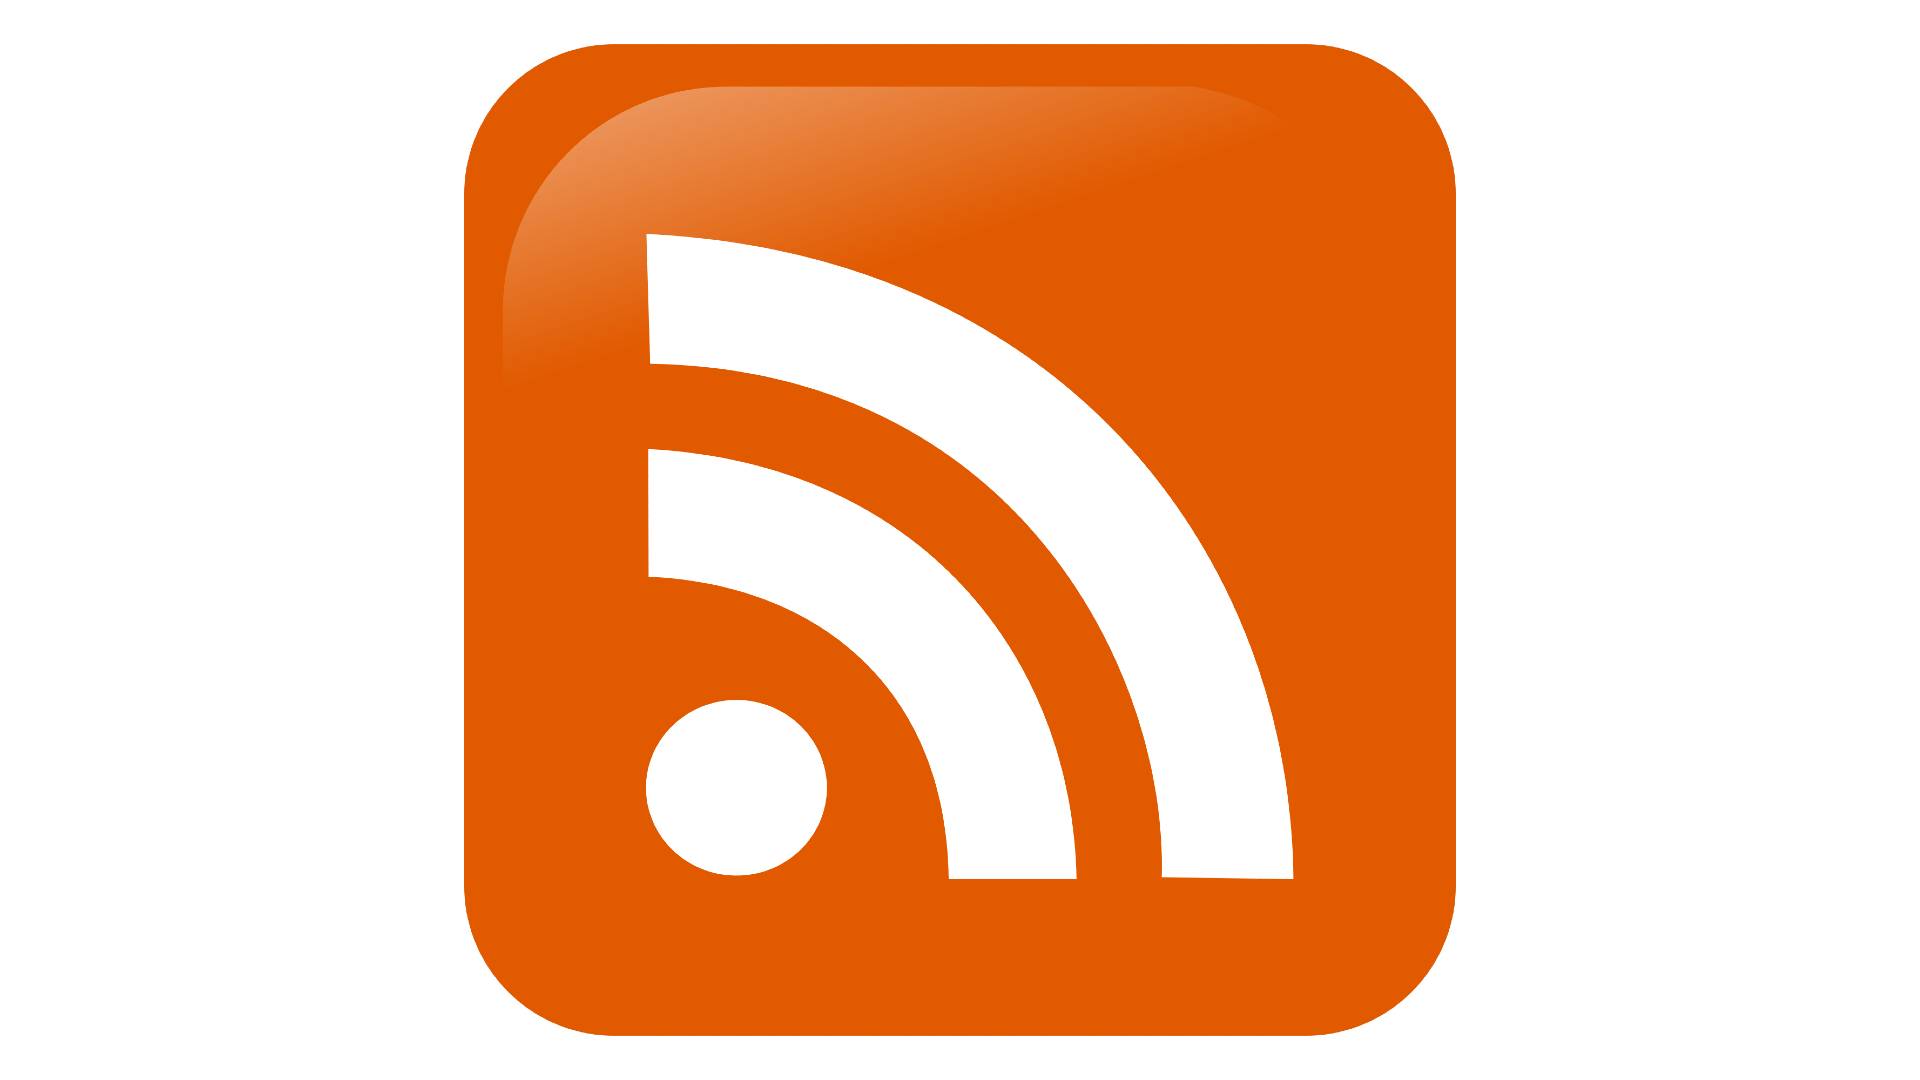 Google will soon let you follow RSS feeds in Chrome